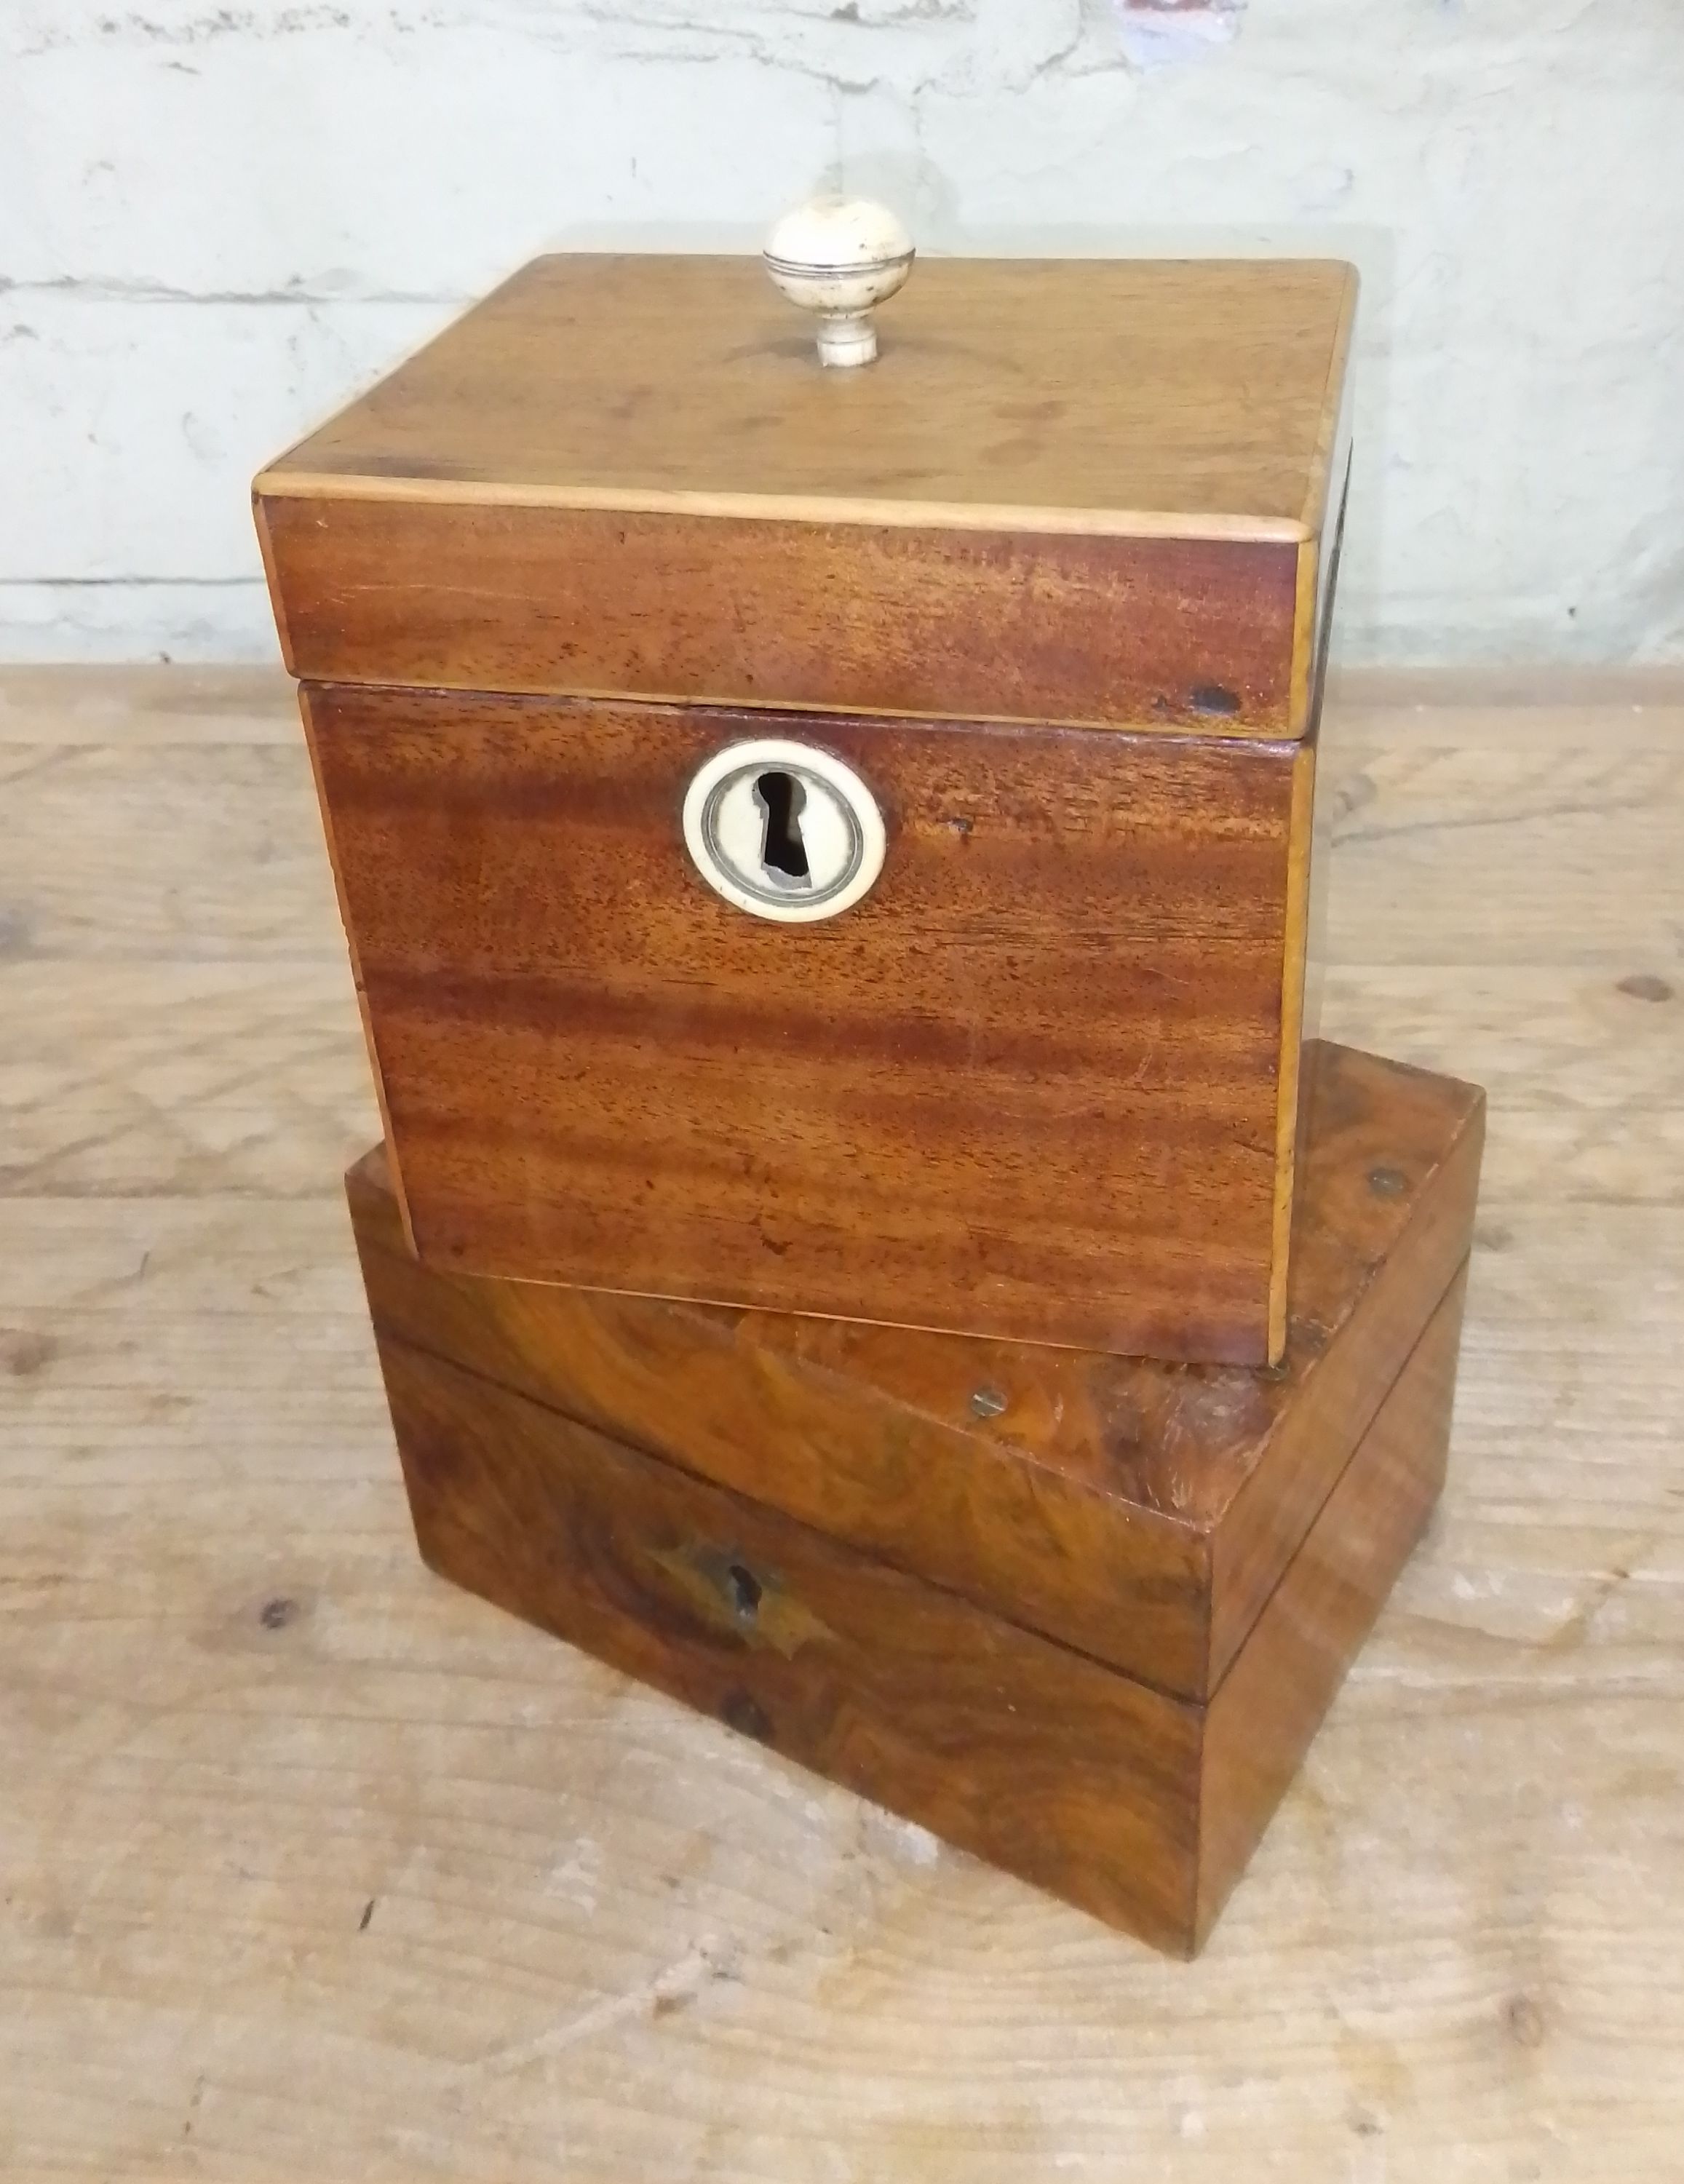 A 19th century mahogany tea caddy with bone finial and escutcheon, together with another box.